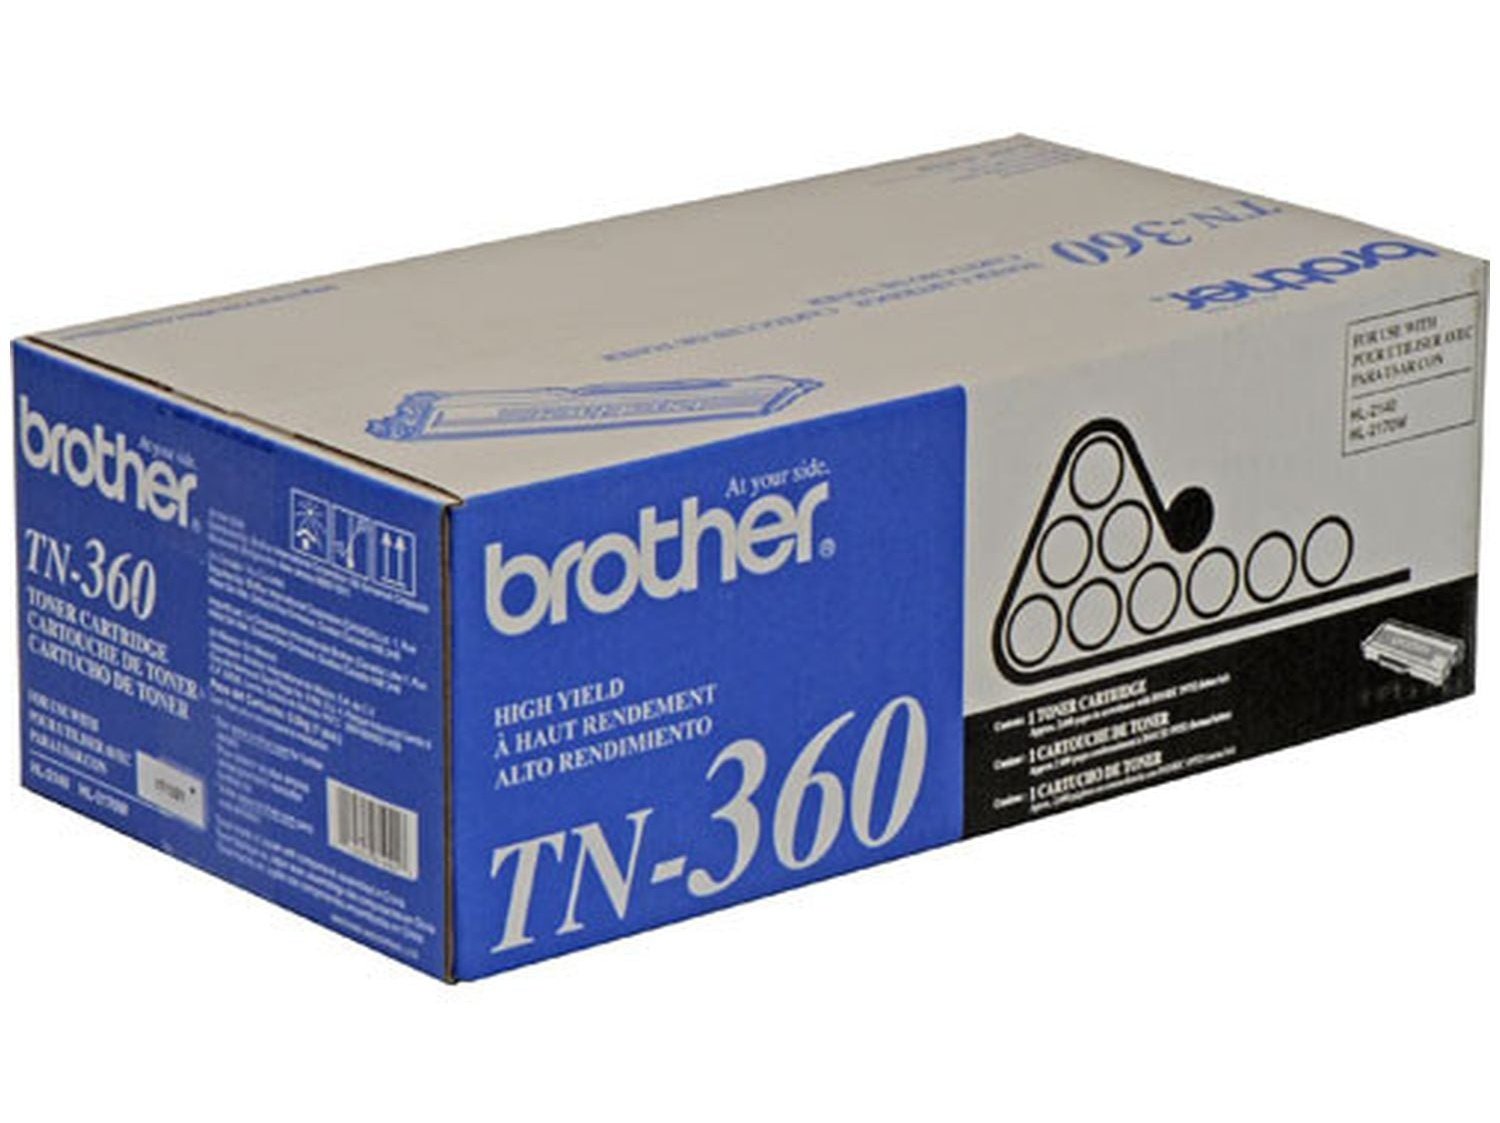 ICU Compatible/ OEM Brother ICUTN360 Yields 2600 Pages TN360 Black Standard Yield 2600 Pages Toner Cartridge (TN360BK) - Ink Cartridges USA